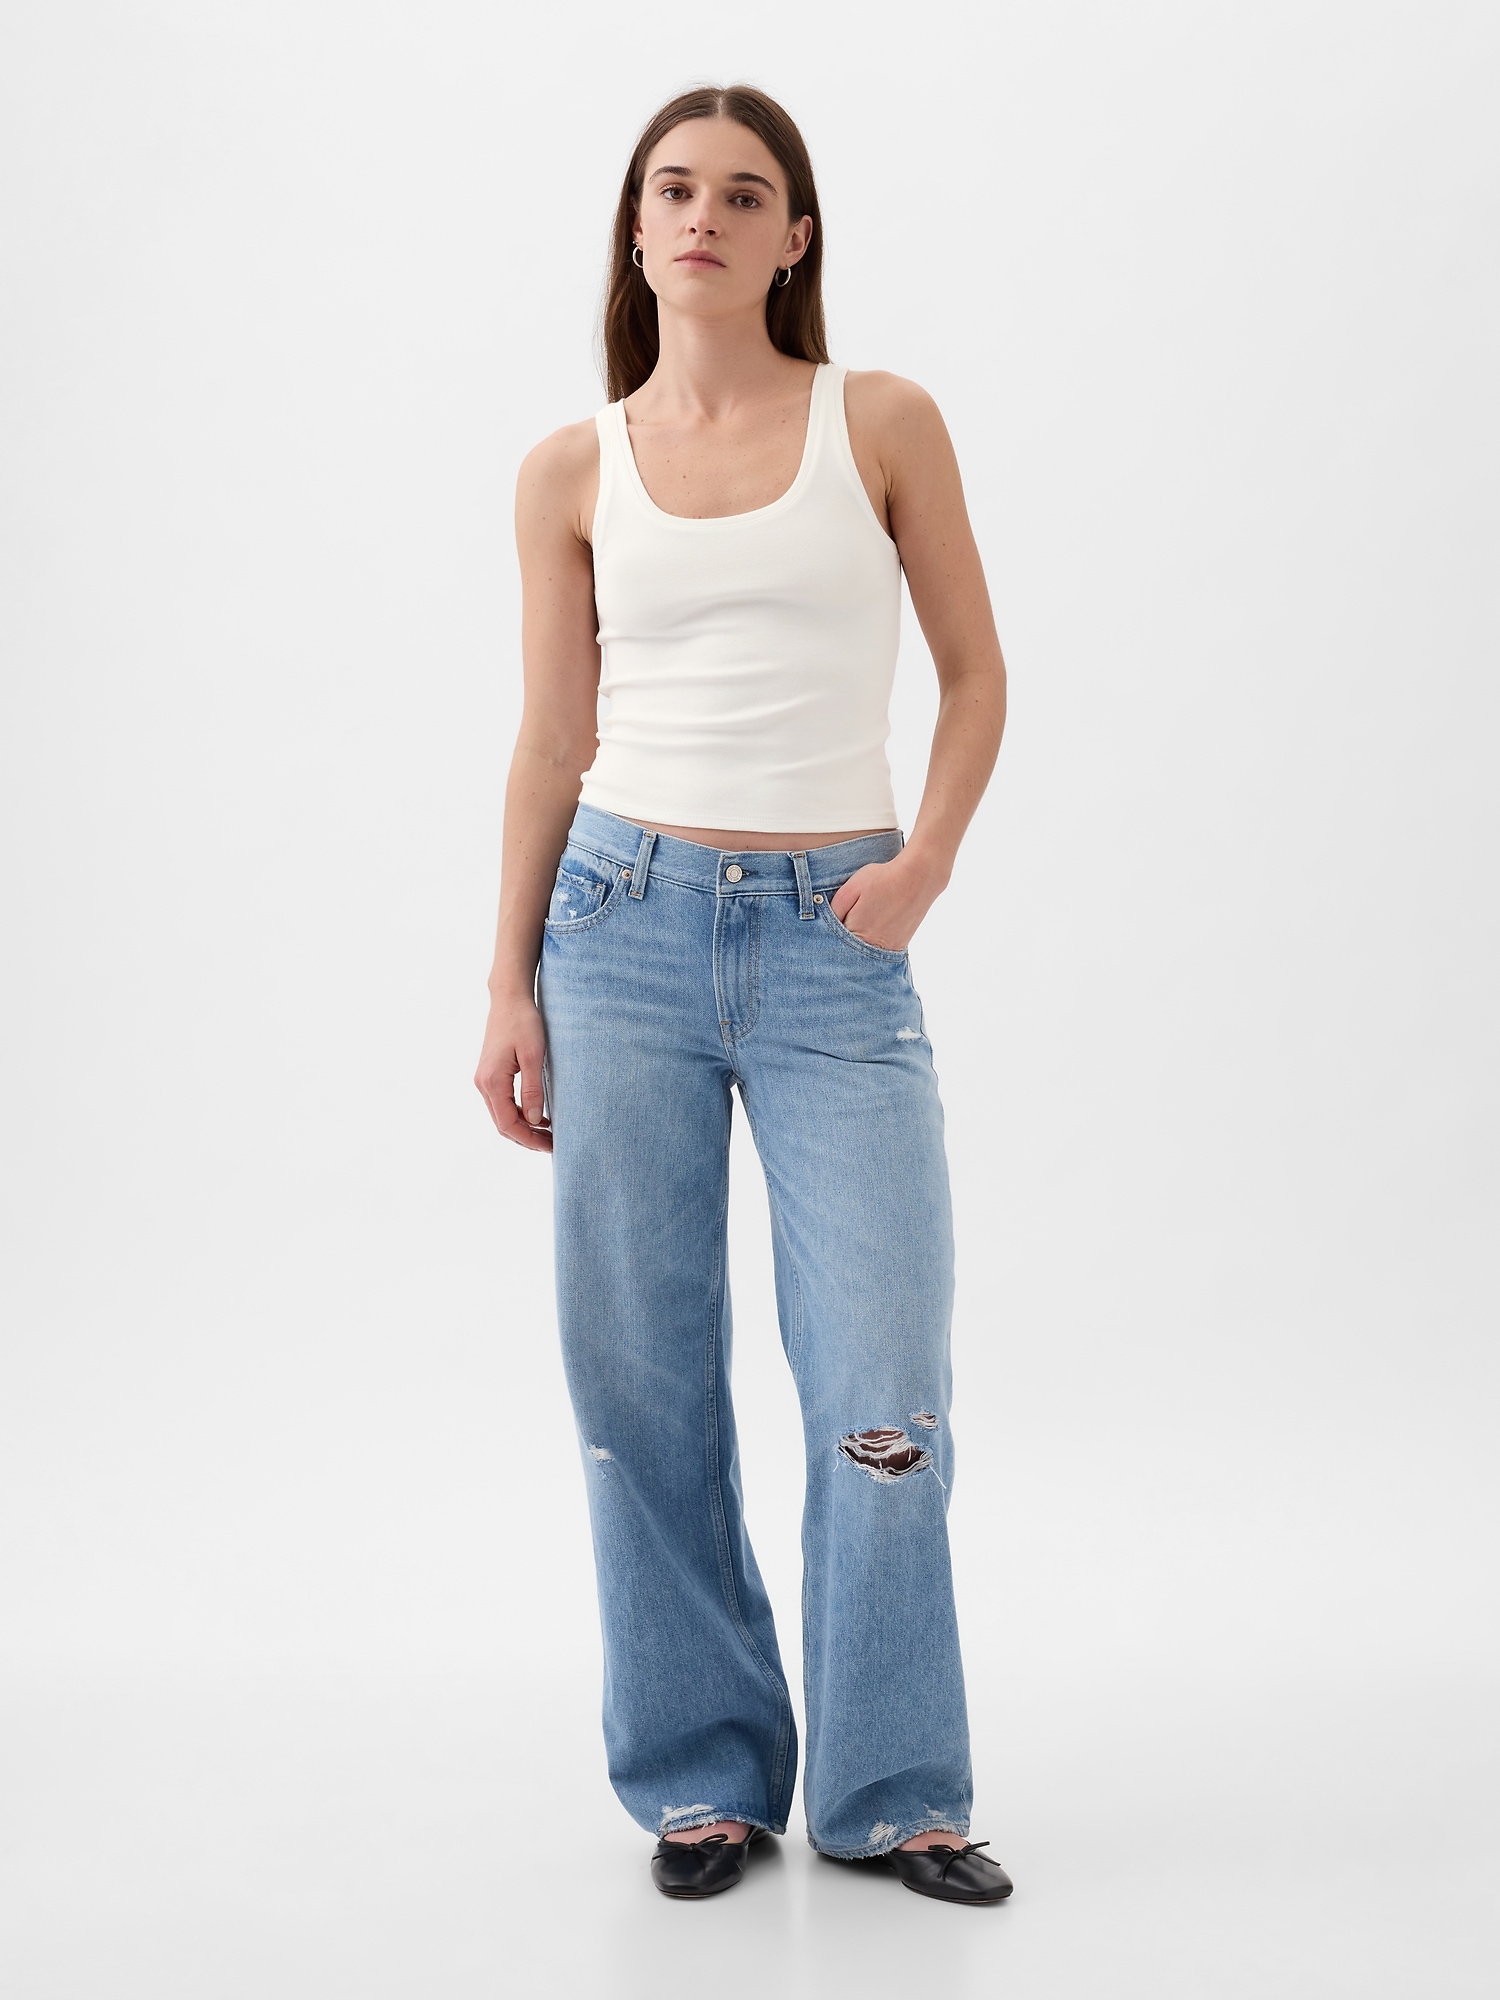 Shop Girl LTHTRGRB08 PROJECT GAP Cropped Rib Tank Top - 90 AED in